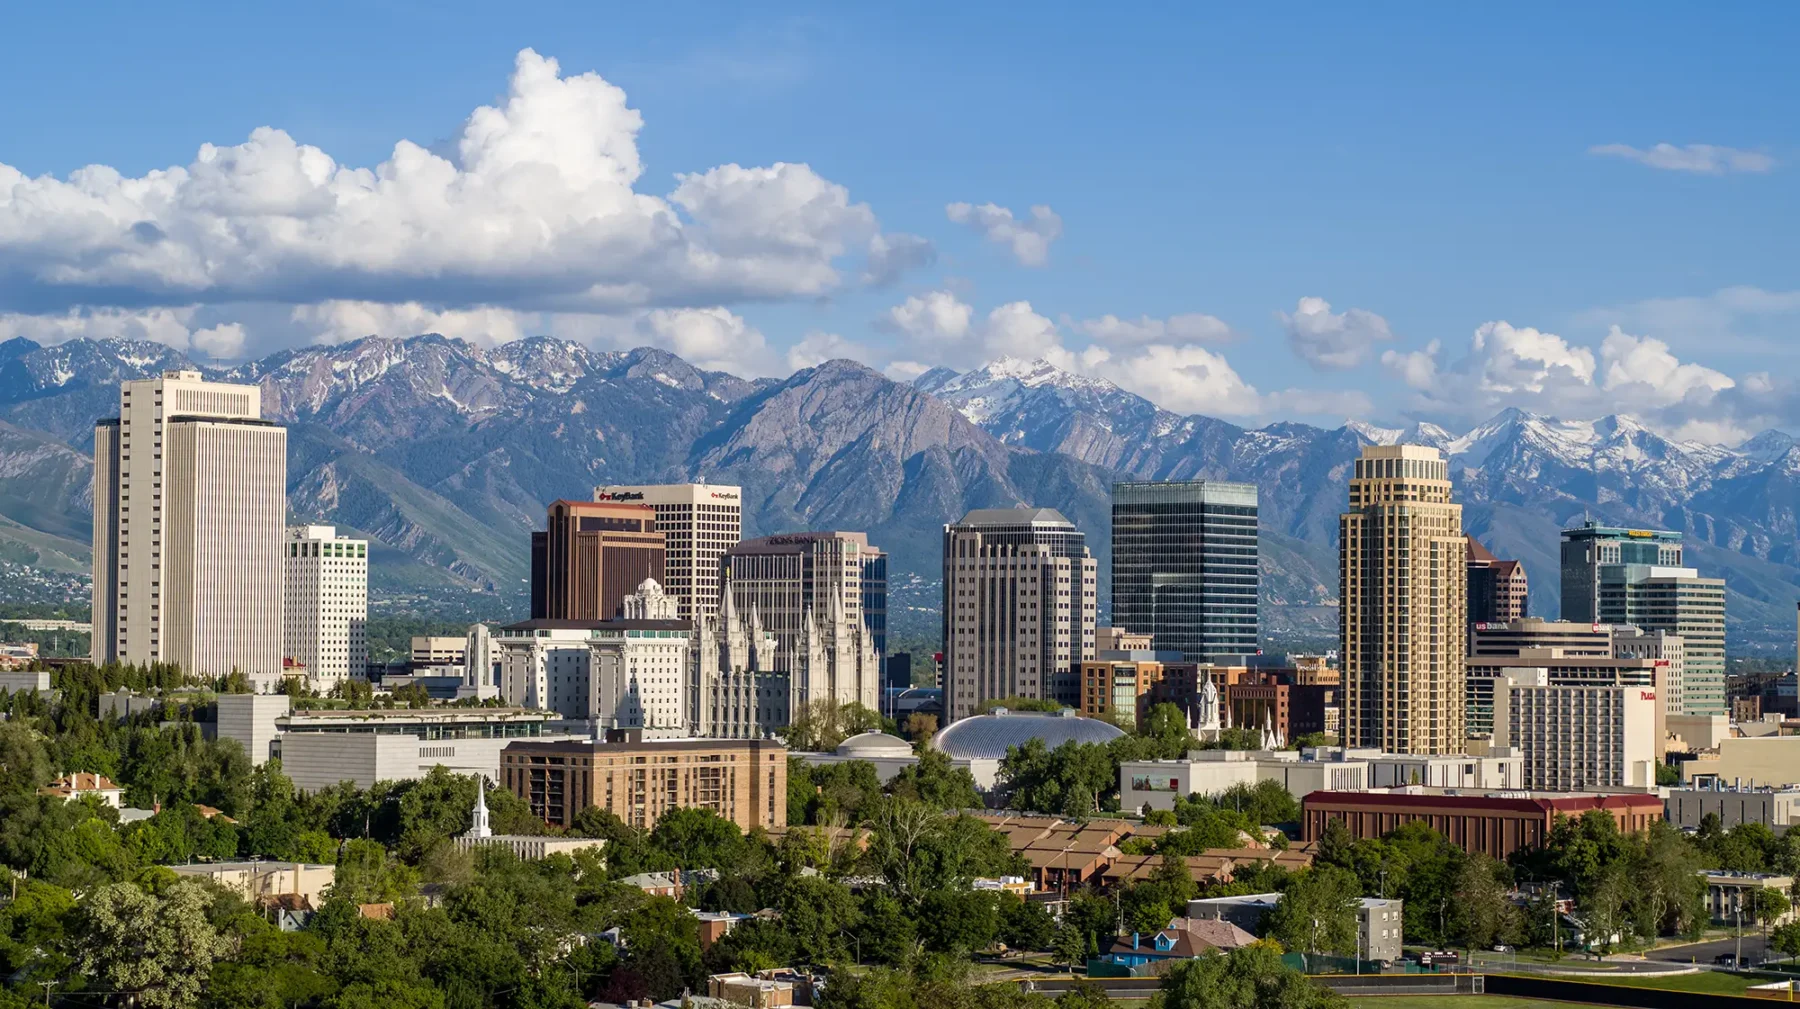 Aerial view of Salt lake city skyline with tall buildings and mountains in the distance